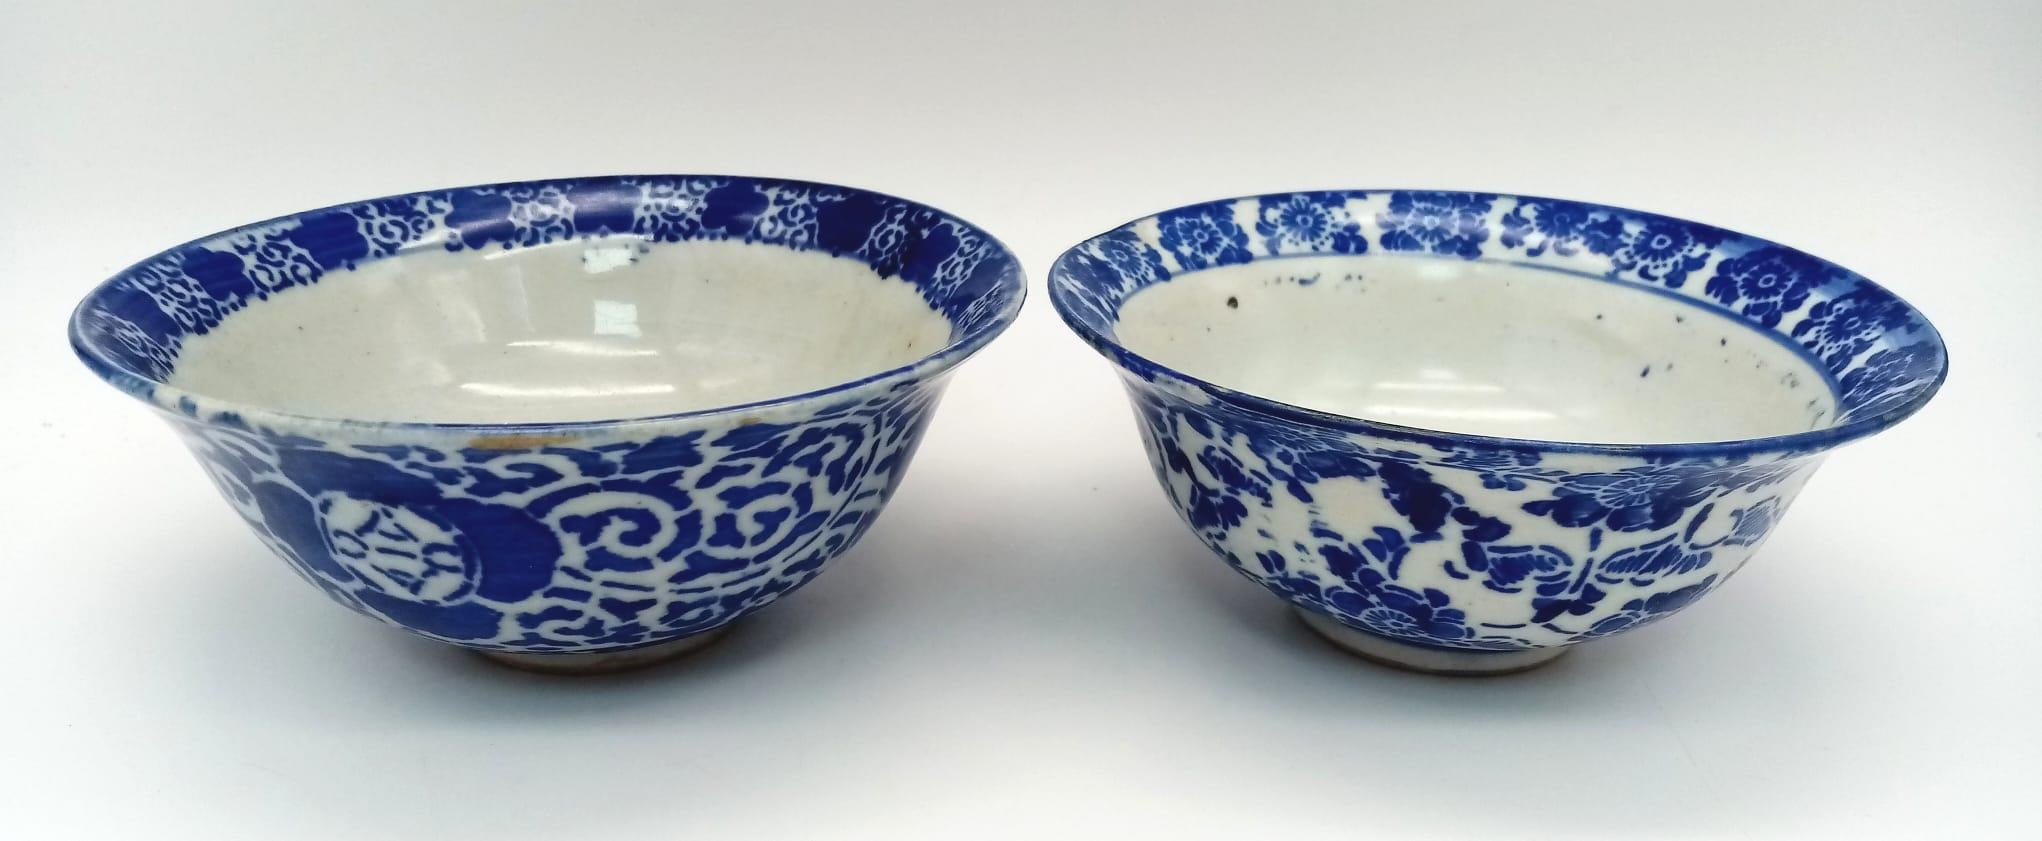 Two 15th Century Chinese Blue and White Rice Bowls. 13cm diameter. Please see photos for - Image 3 of 5